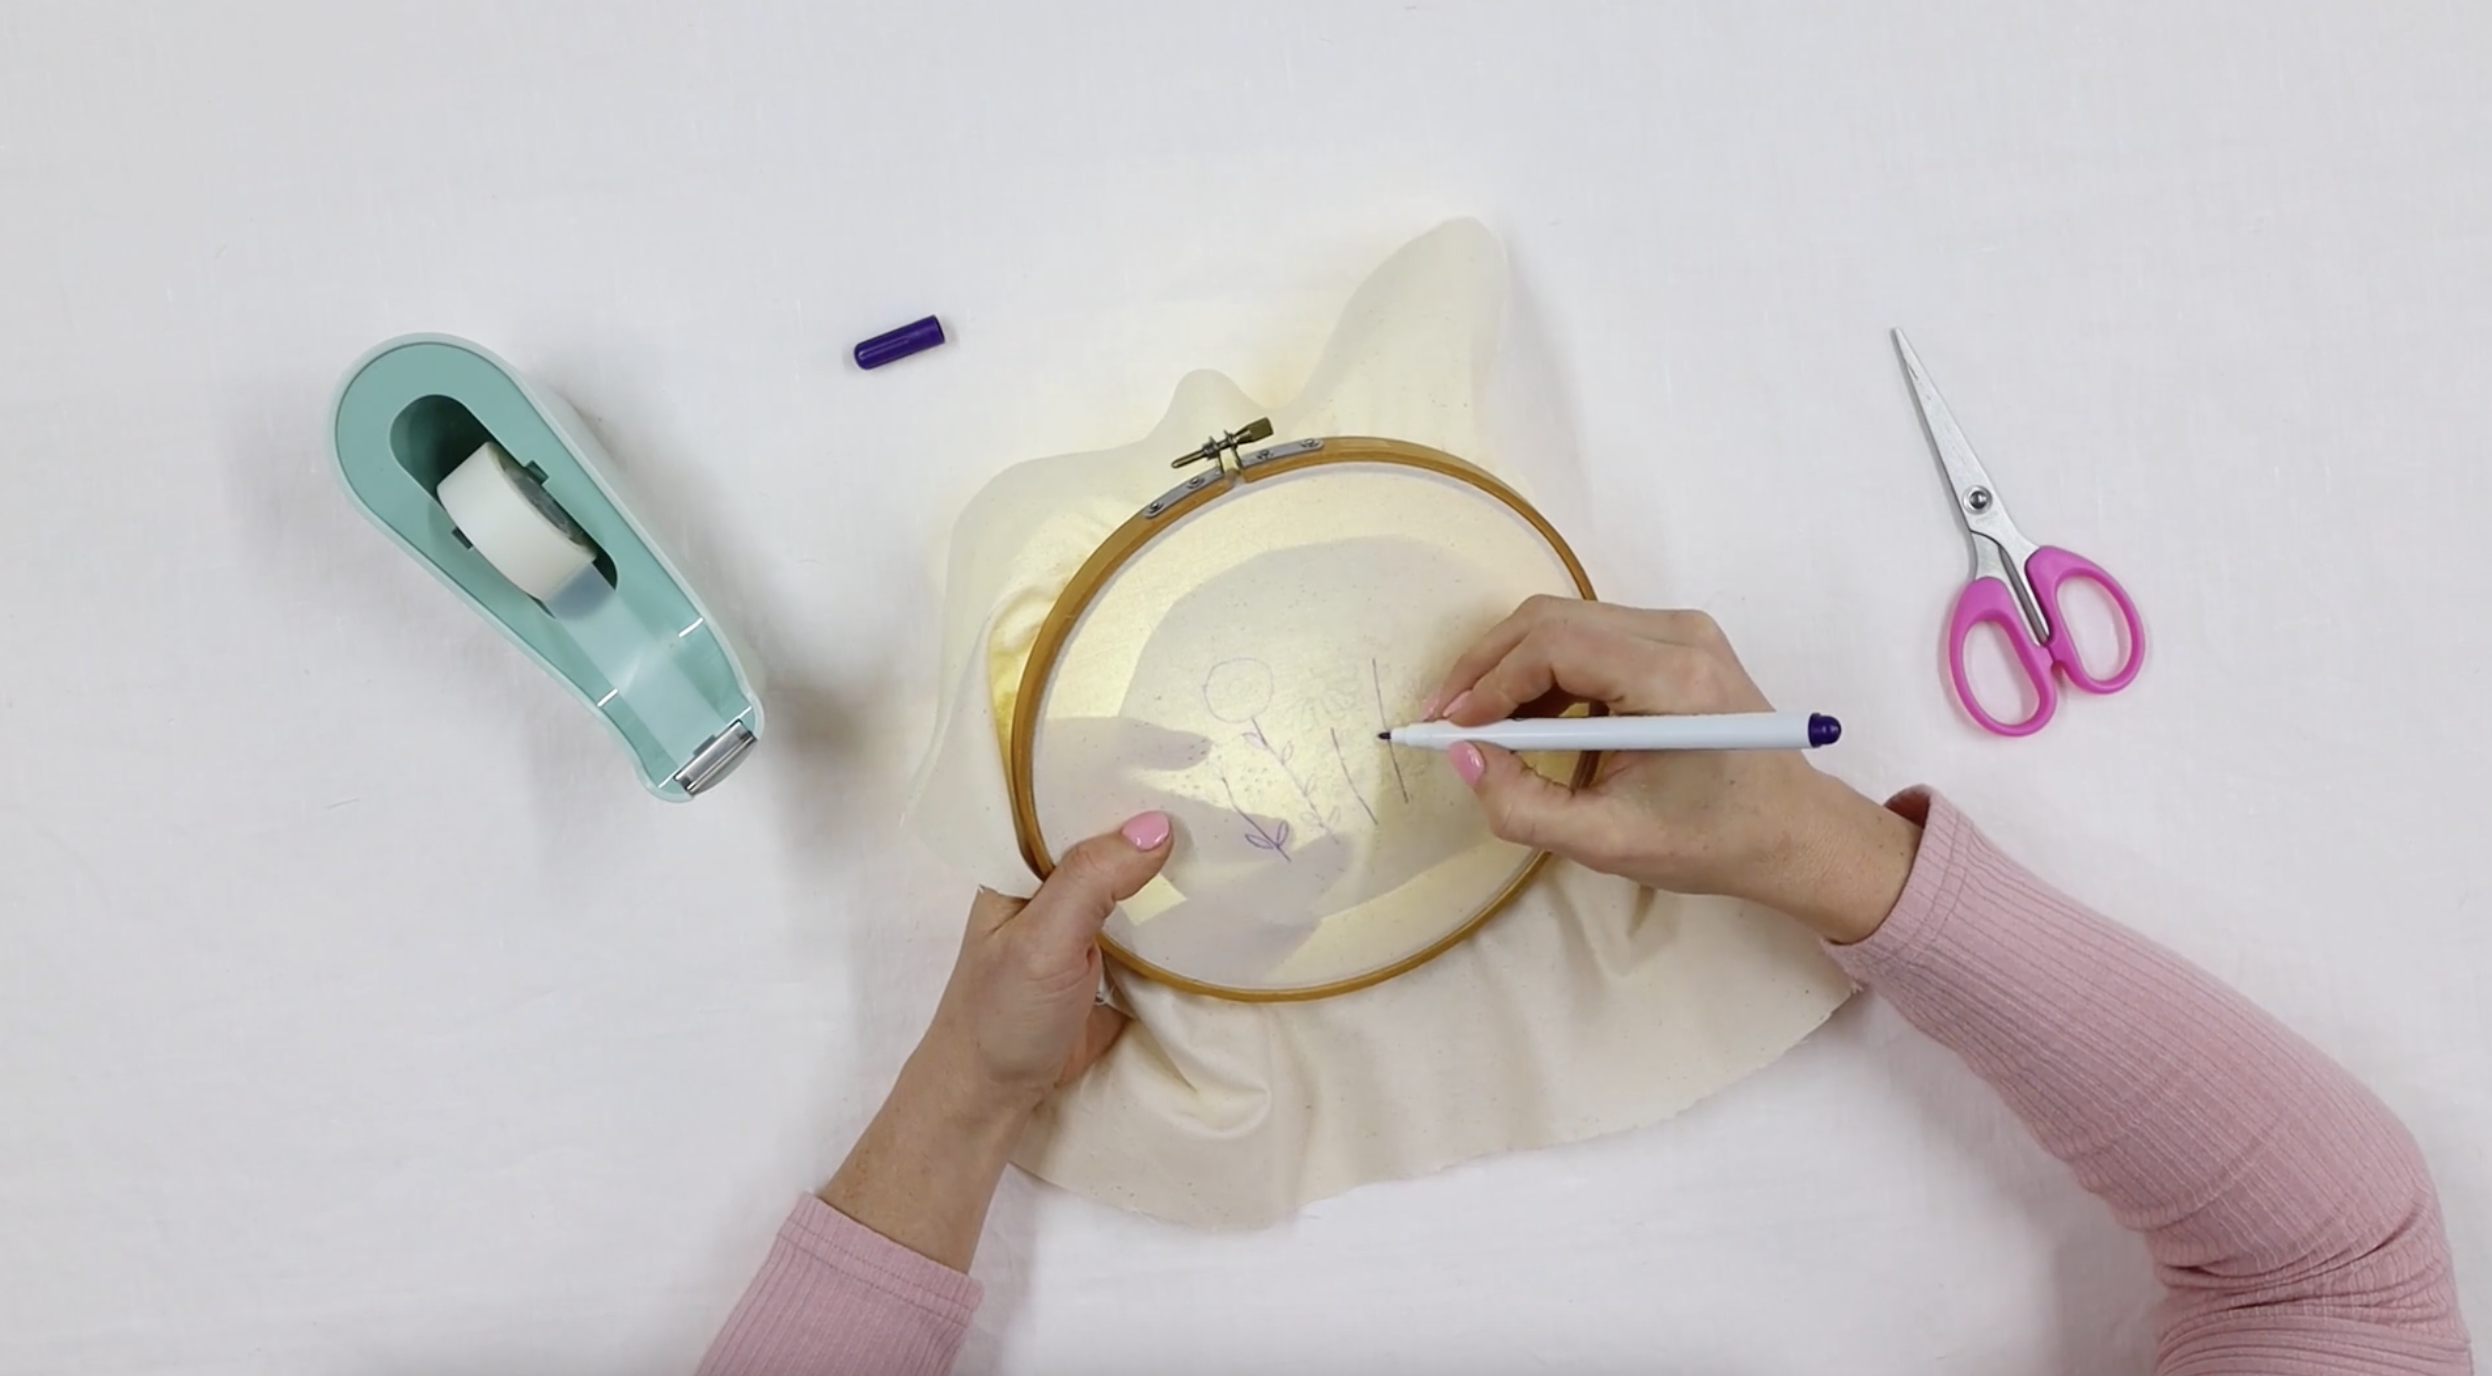 A hand transfers a pattern onto the embroidery hoop using a transfer pen.